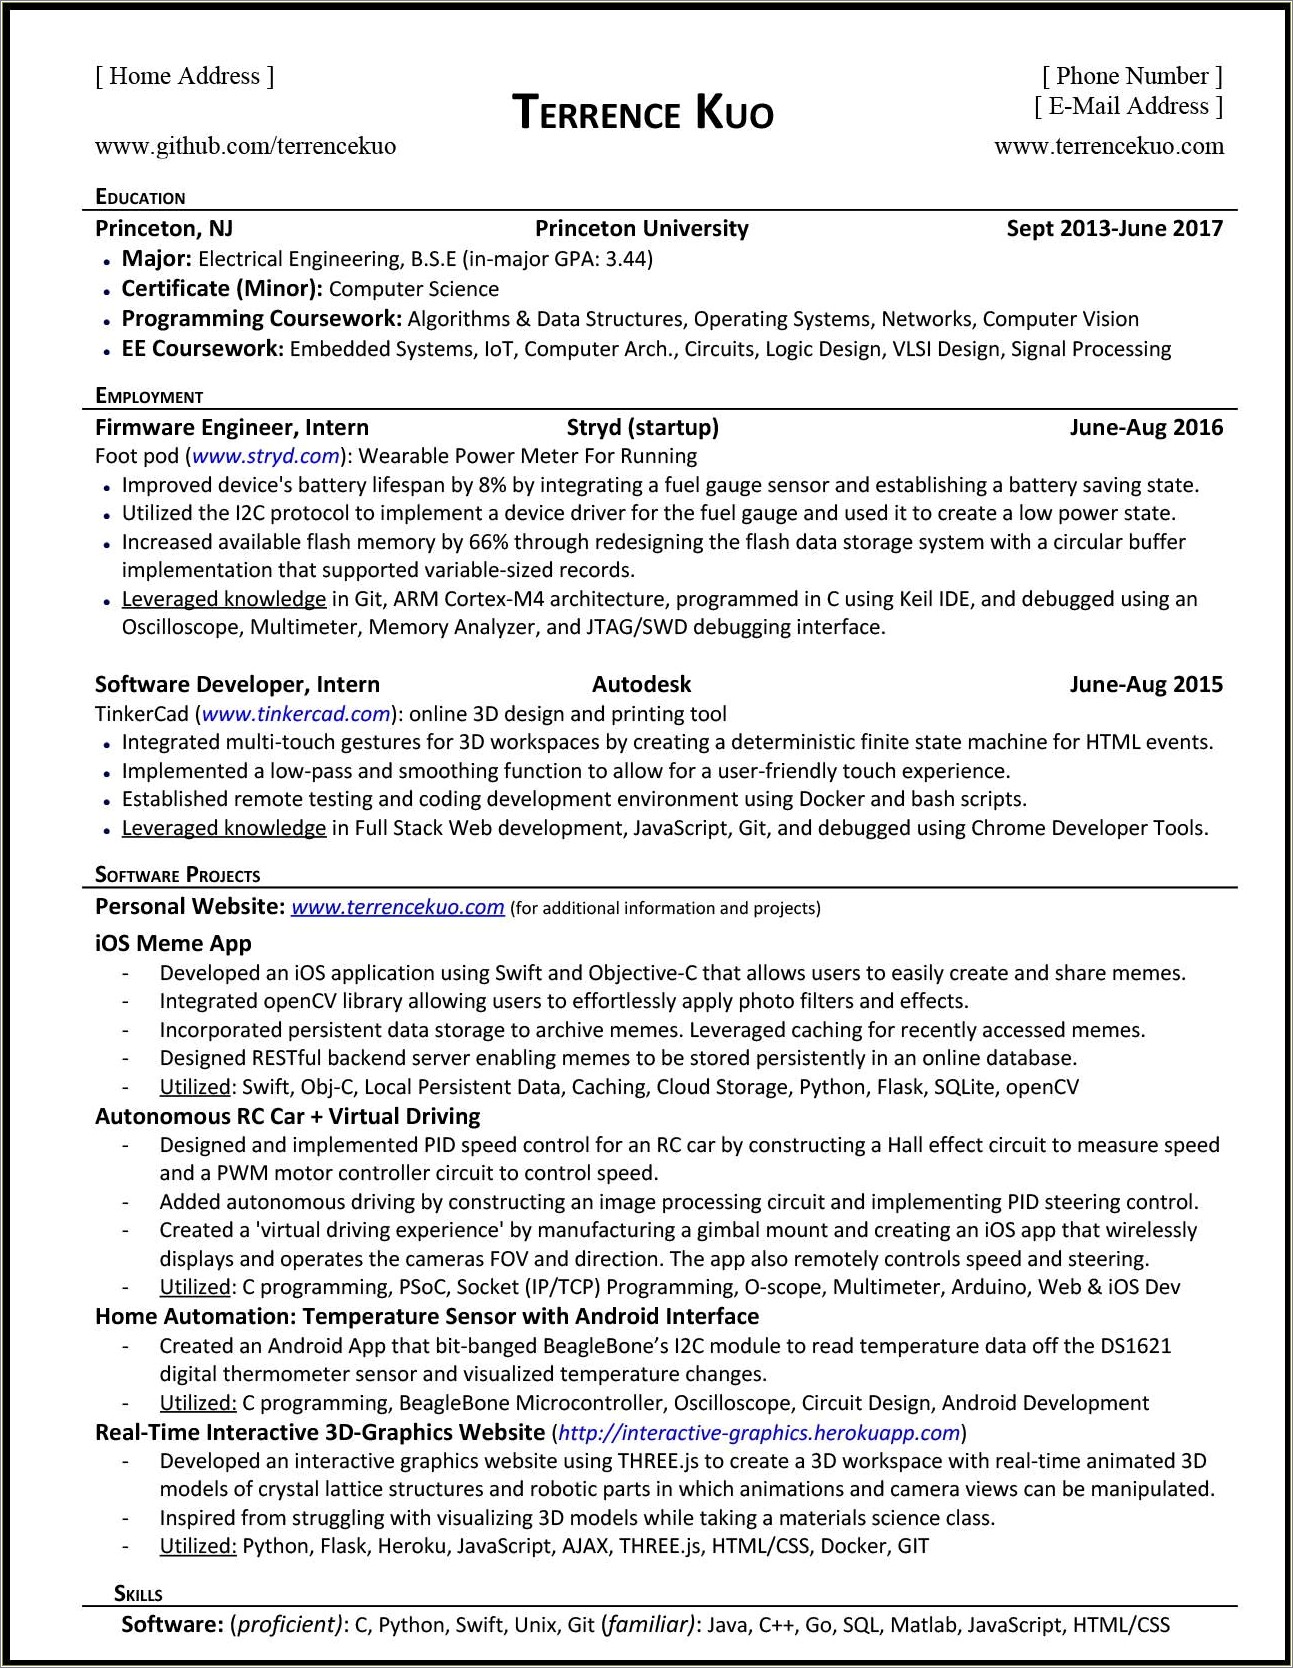 Where Should I Put Scripting Experience On Resume